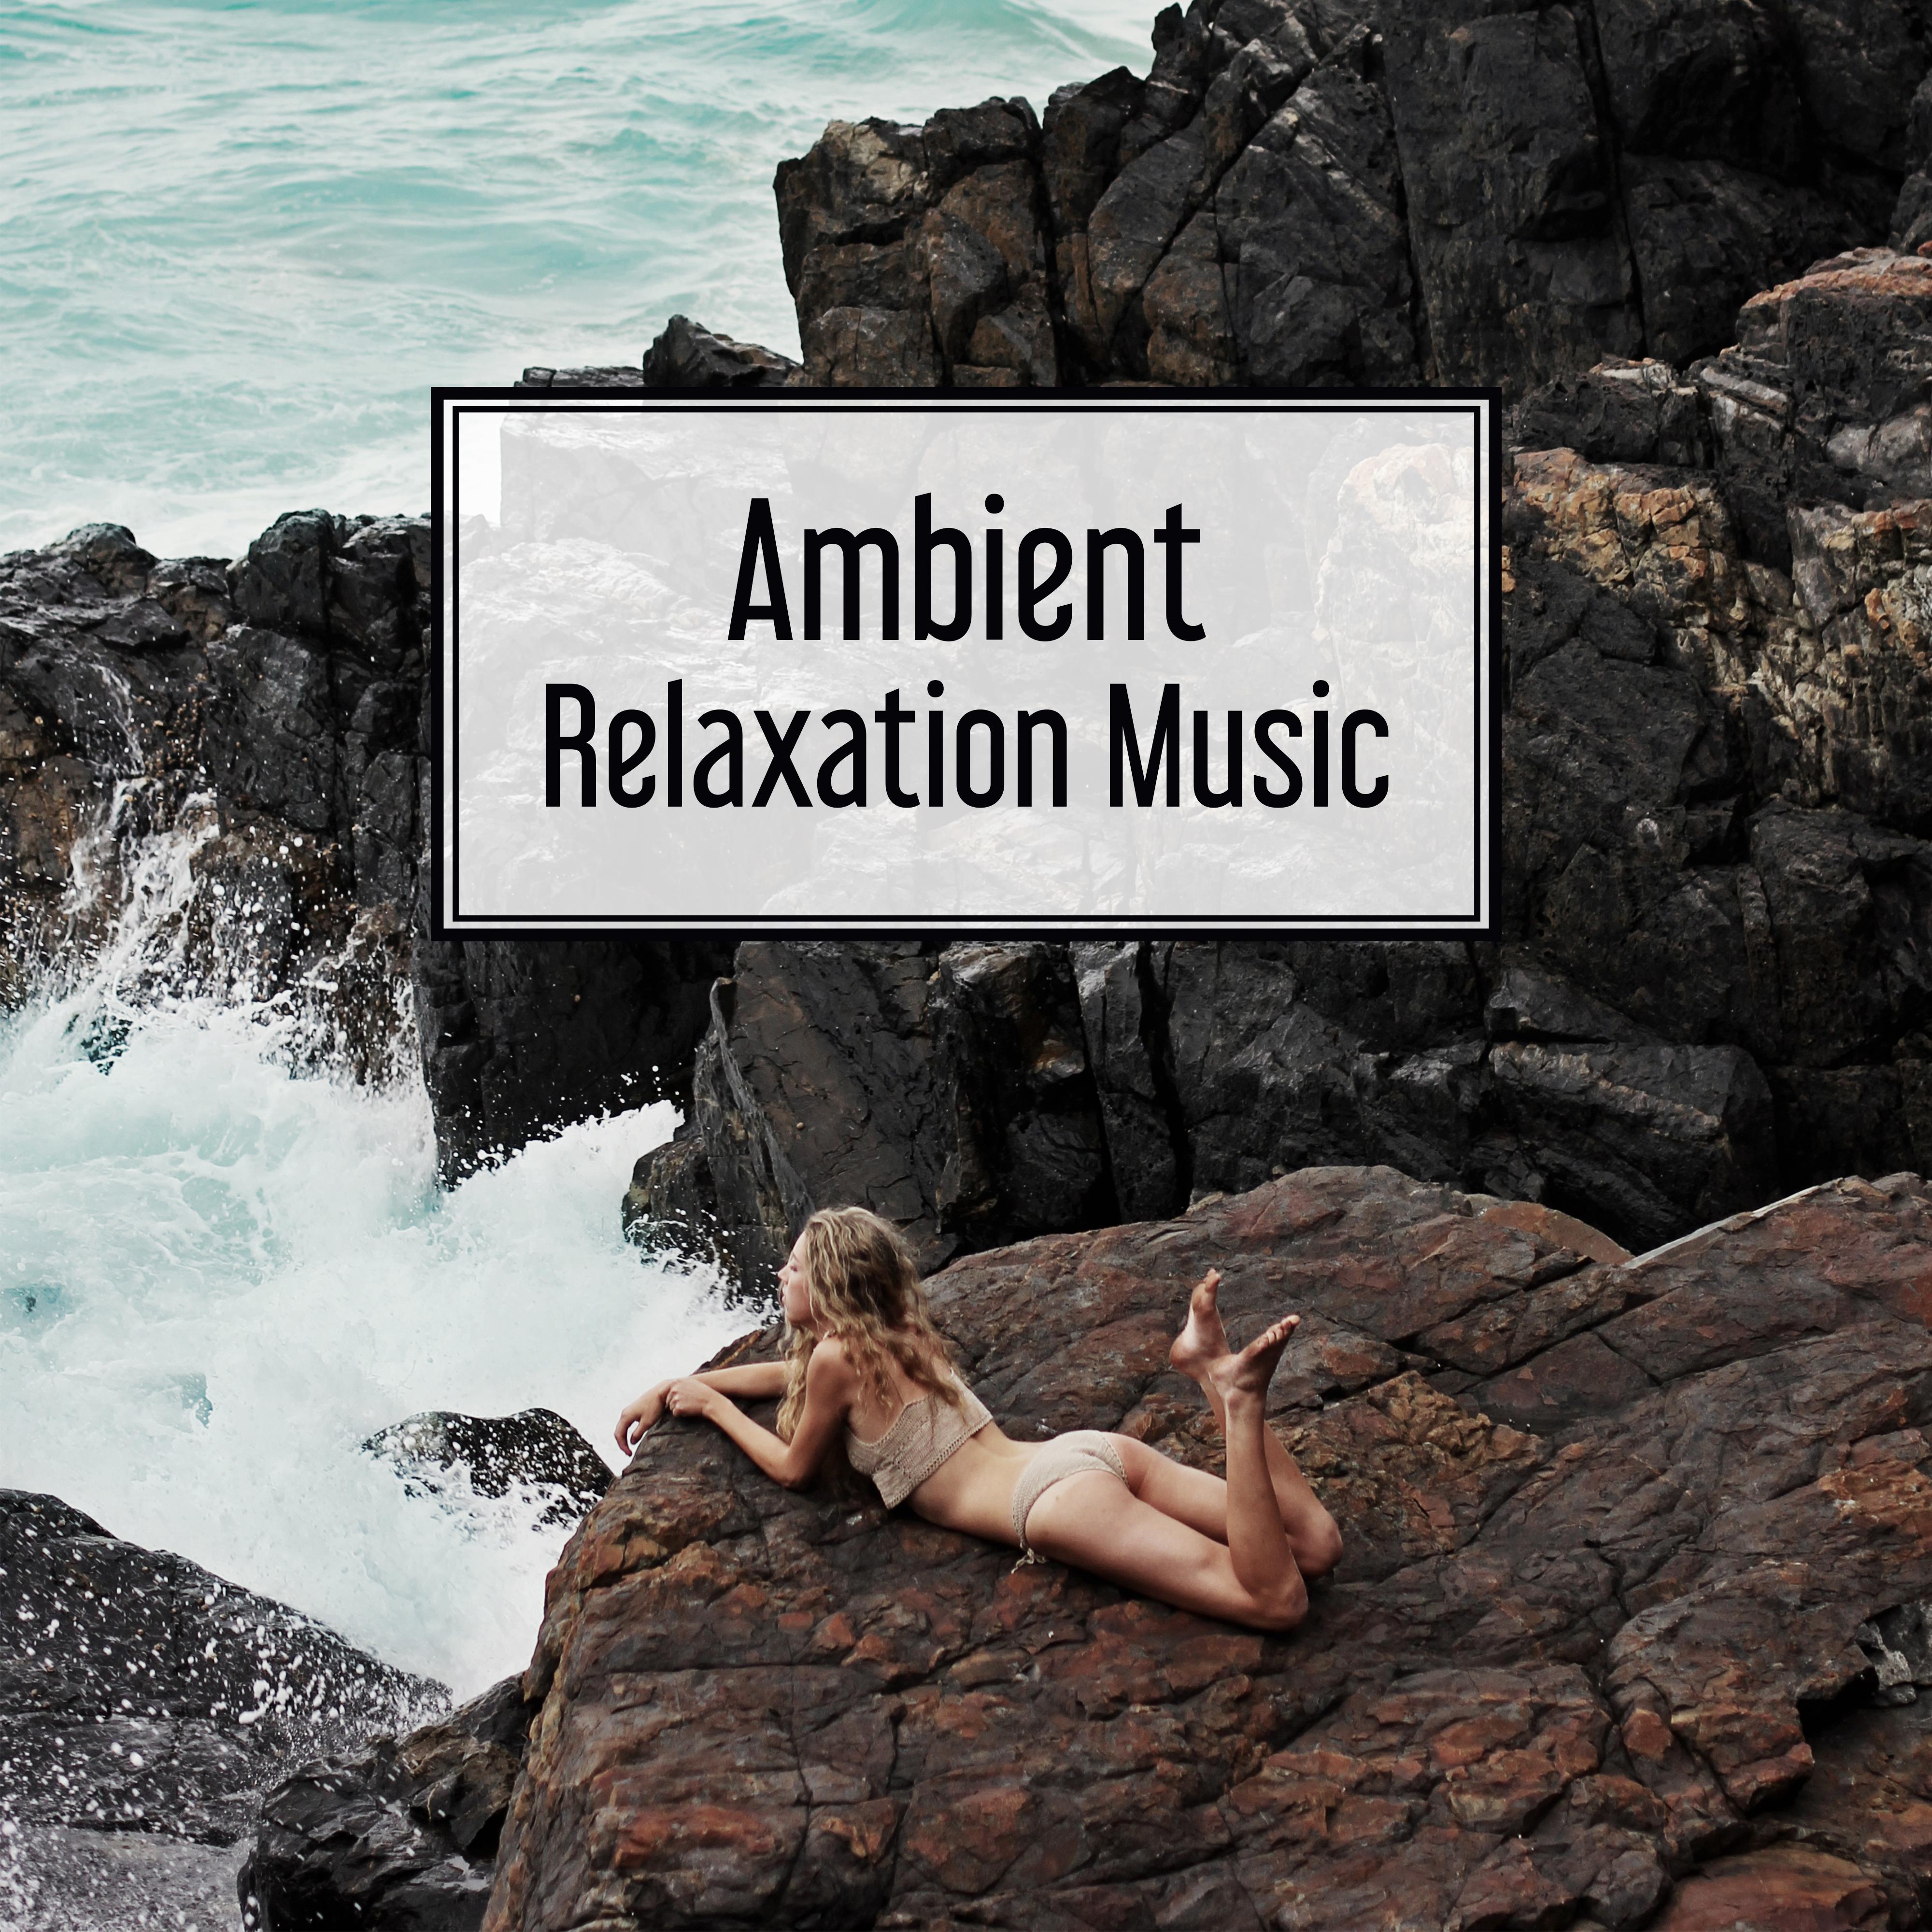 Ambient Relaxation Music – Soft Sounds to Rest, Mind Calmness, Spirit Harmony, Peaceful Music